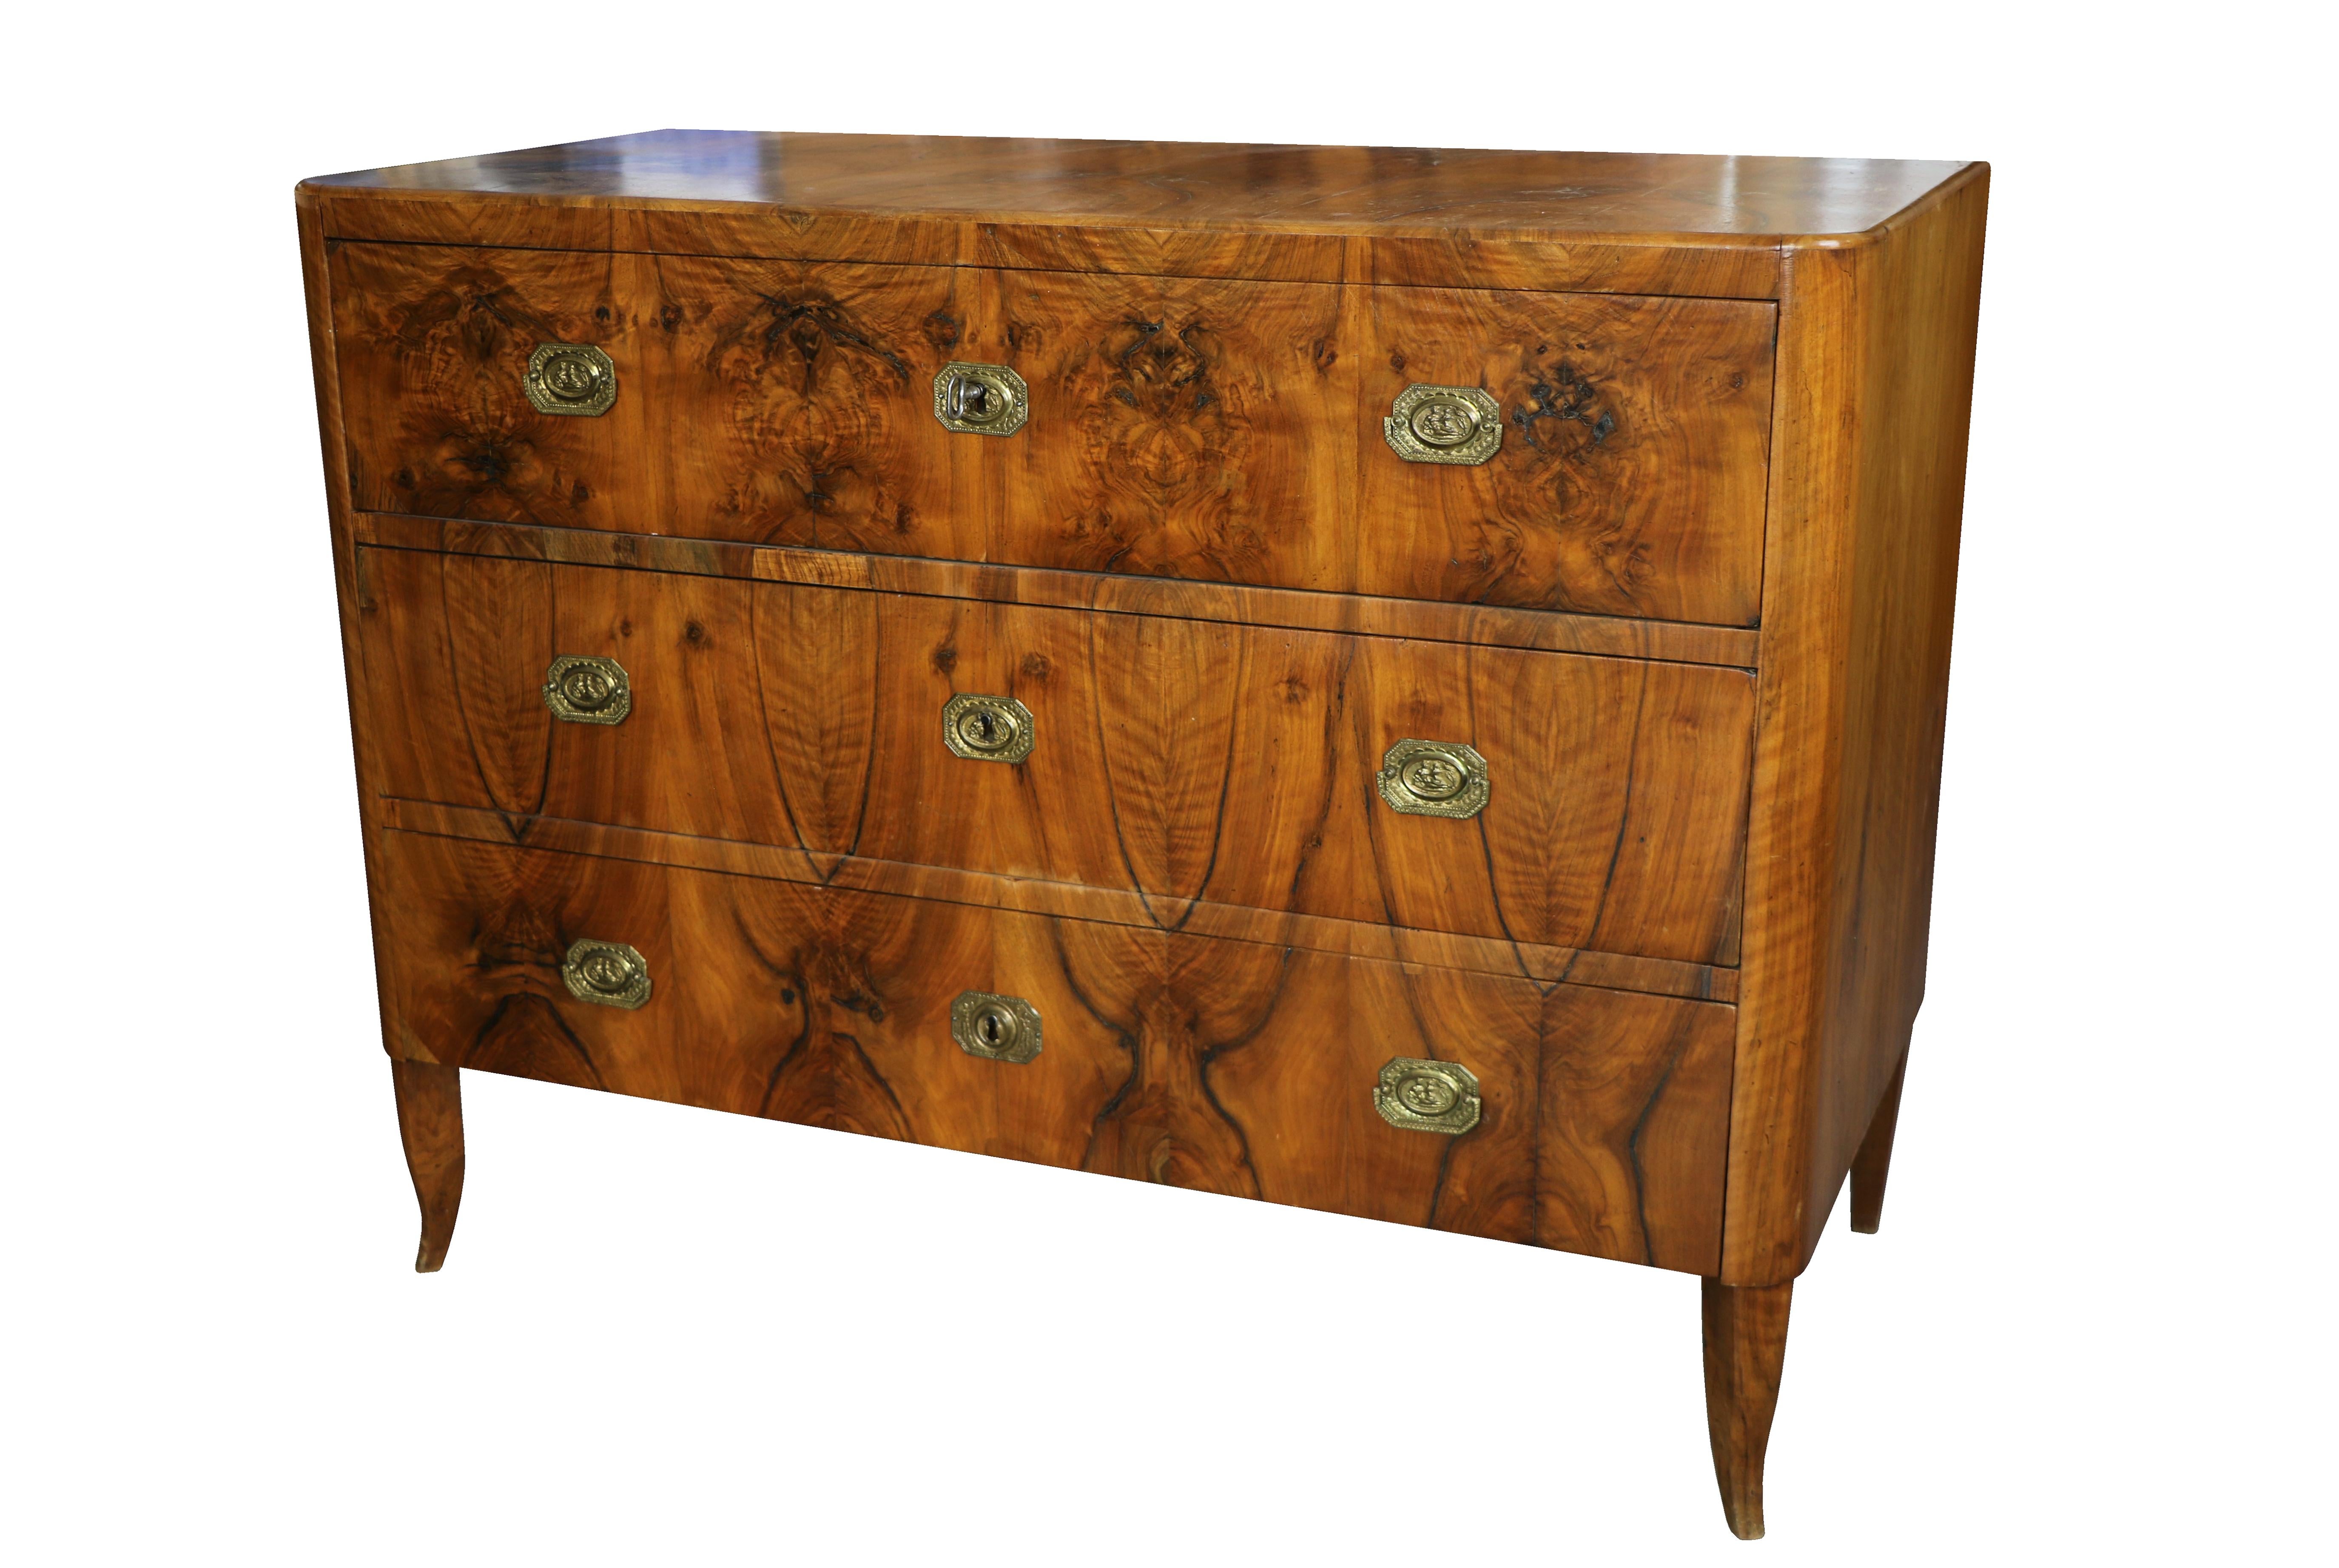 Hello,

We would like to offer you this truly exquisite, early Biedermeier walnut chest of drawers.
Viennese Biedermeier is distinguished by their sophisticated proportions, rare and refined design and excellent craftsmanship and continue to have a